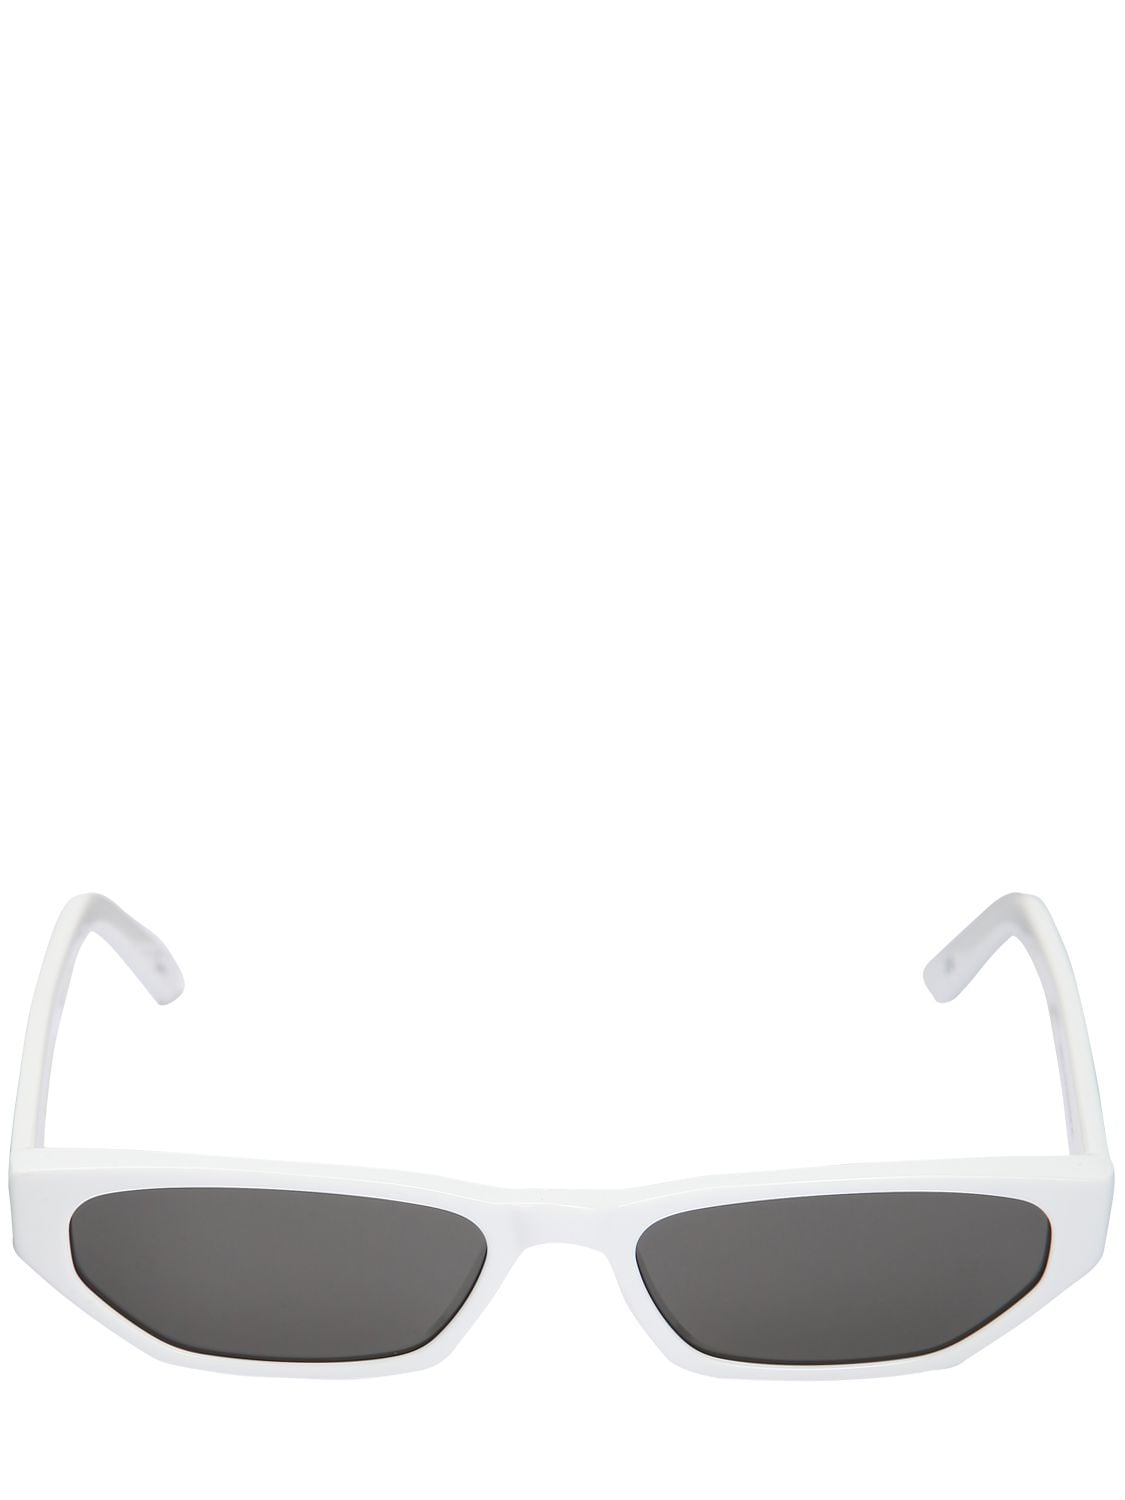 Andy Wolf Tamsyn Oval Acetate Sunglasses In White